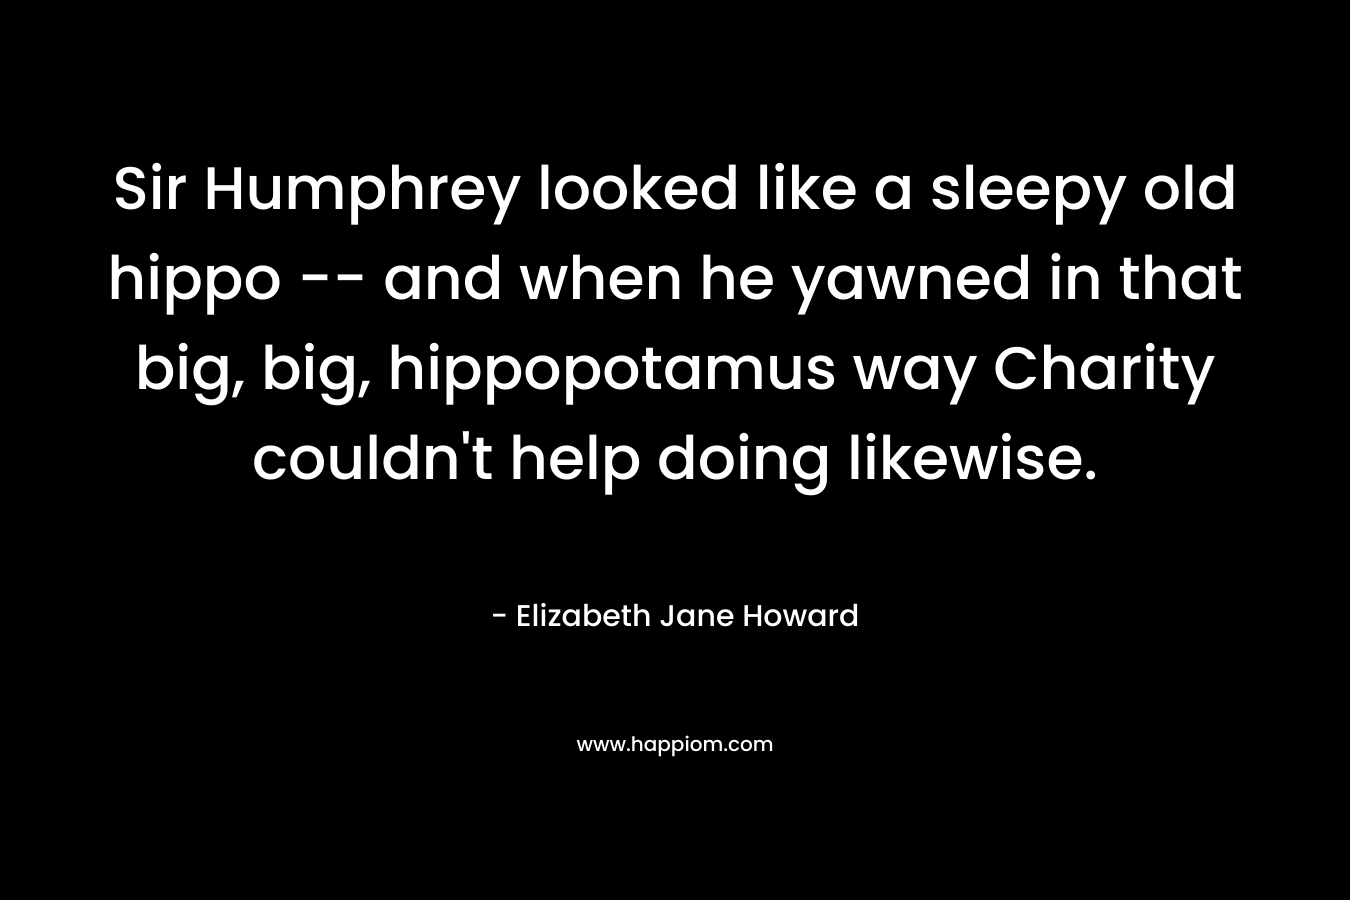 Sir Humphrey looked like a sleepy old hippo -- and when he yawned in that big, big, hippopotamus way Charity couldn't help doing likewise.